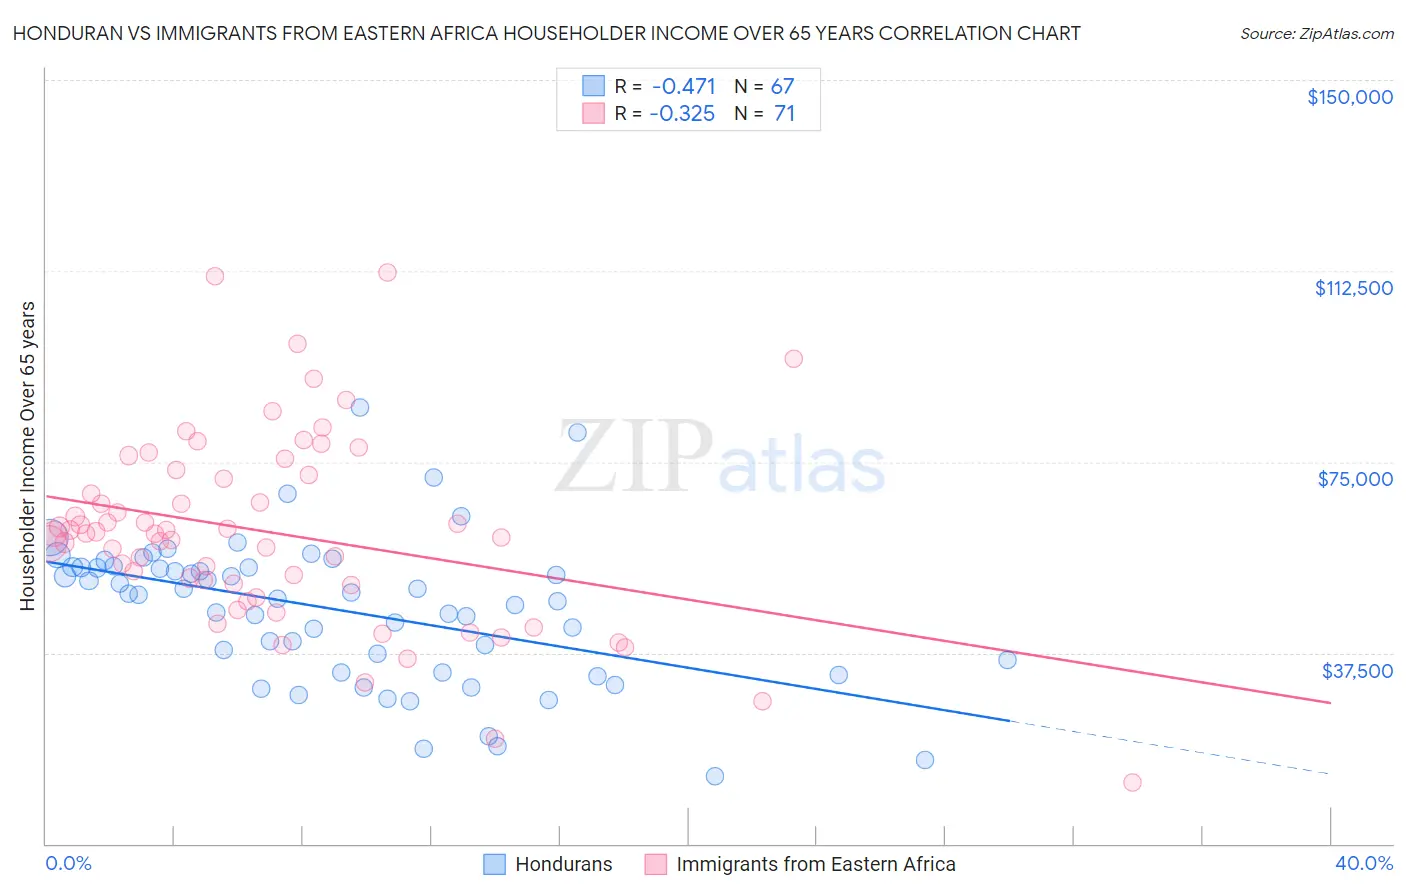 Honduran vs Immigrants from Eastern Africa Householder Income Over 65 years